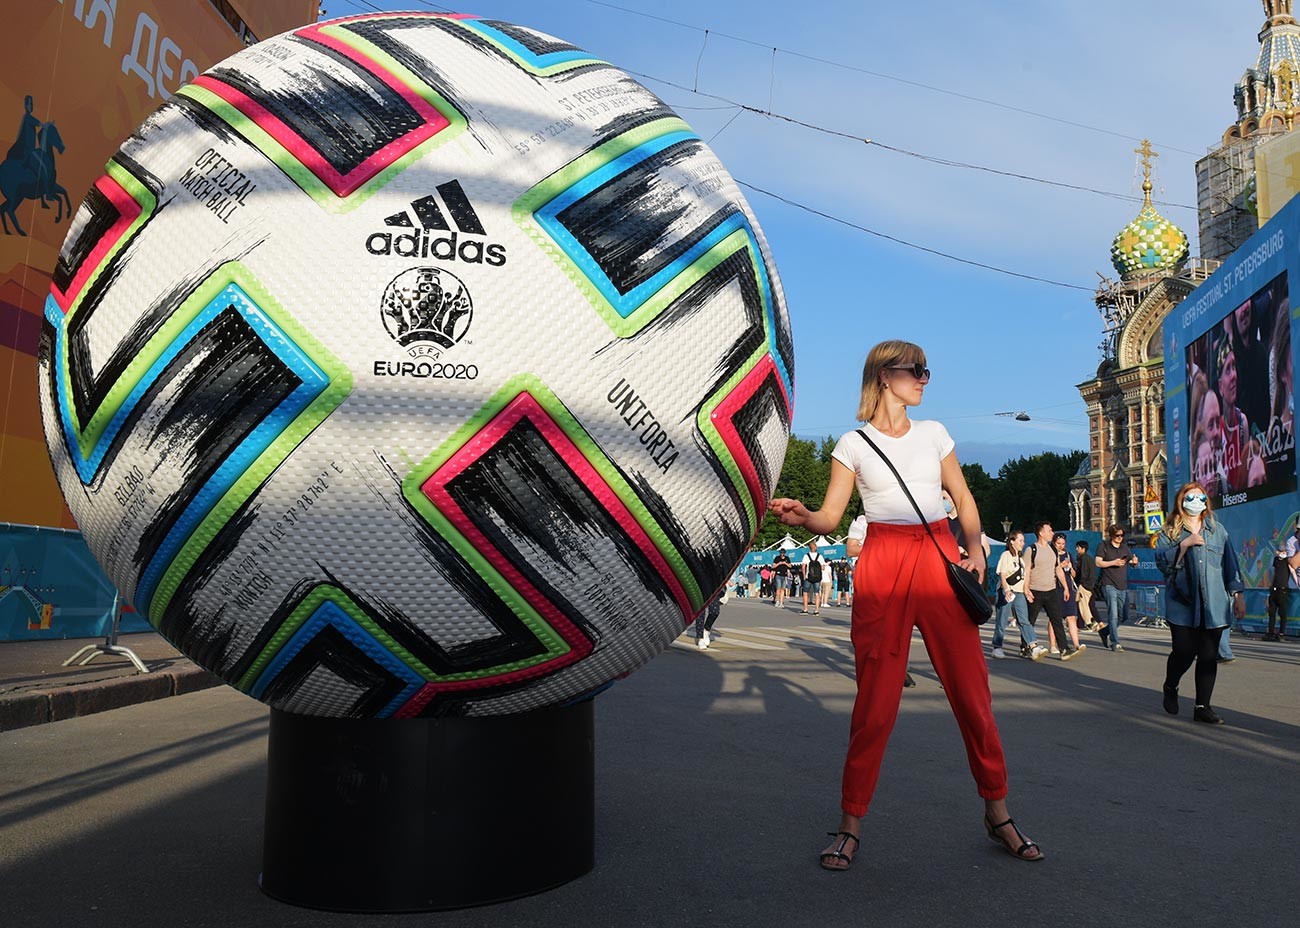 A girl is photographed next to a copy of the official ball of the 2020 European Football Championship in the fan zone on Konyushennaya Square in St. Petersburg.